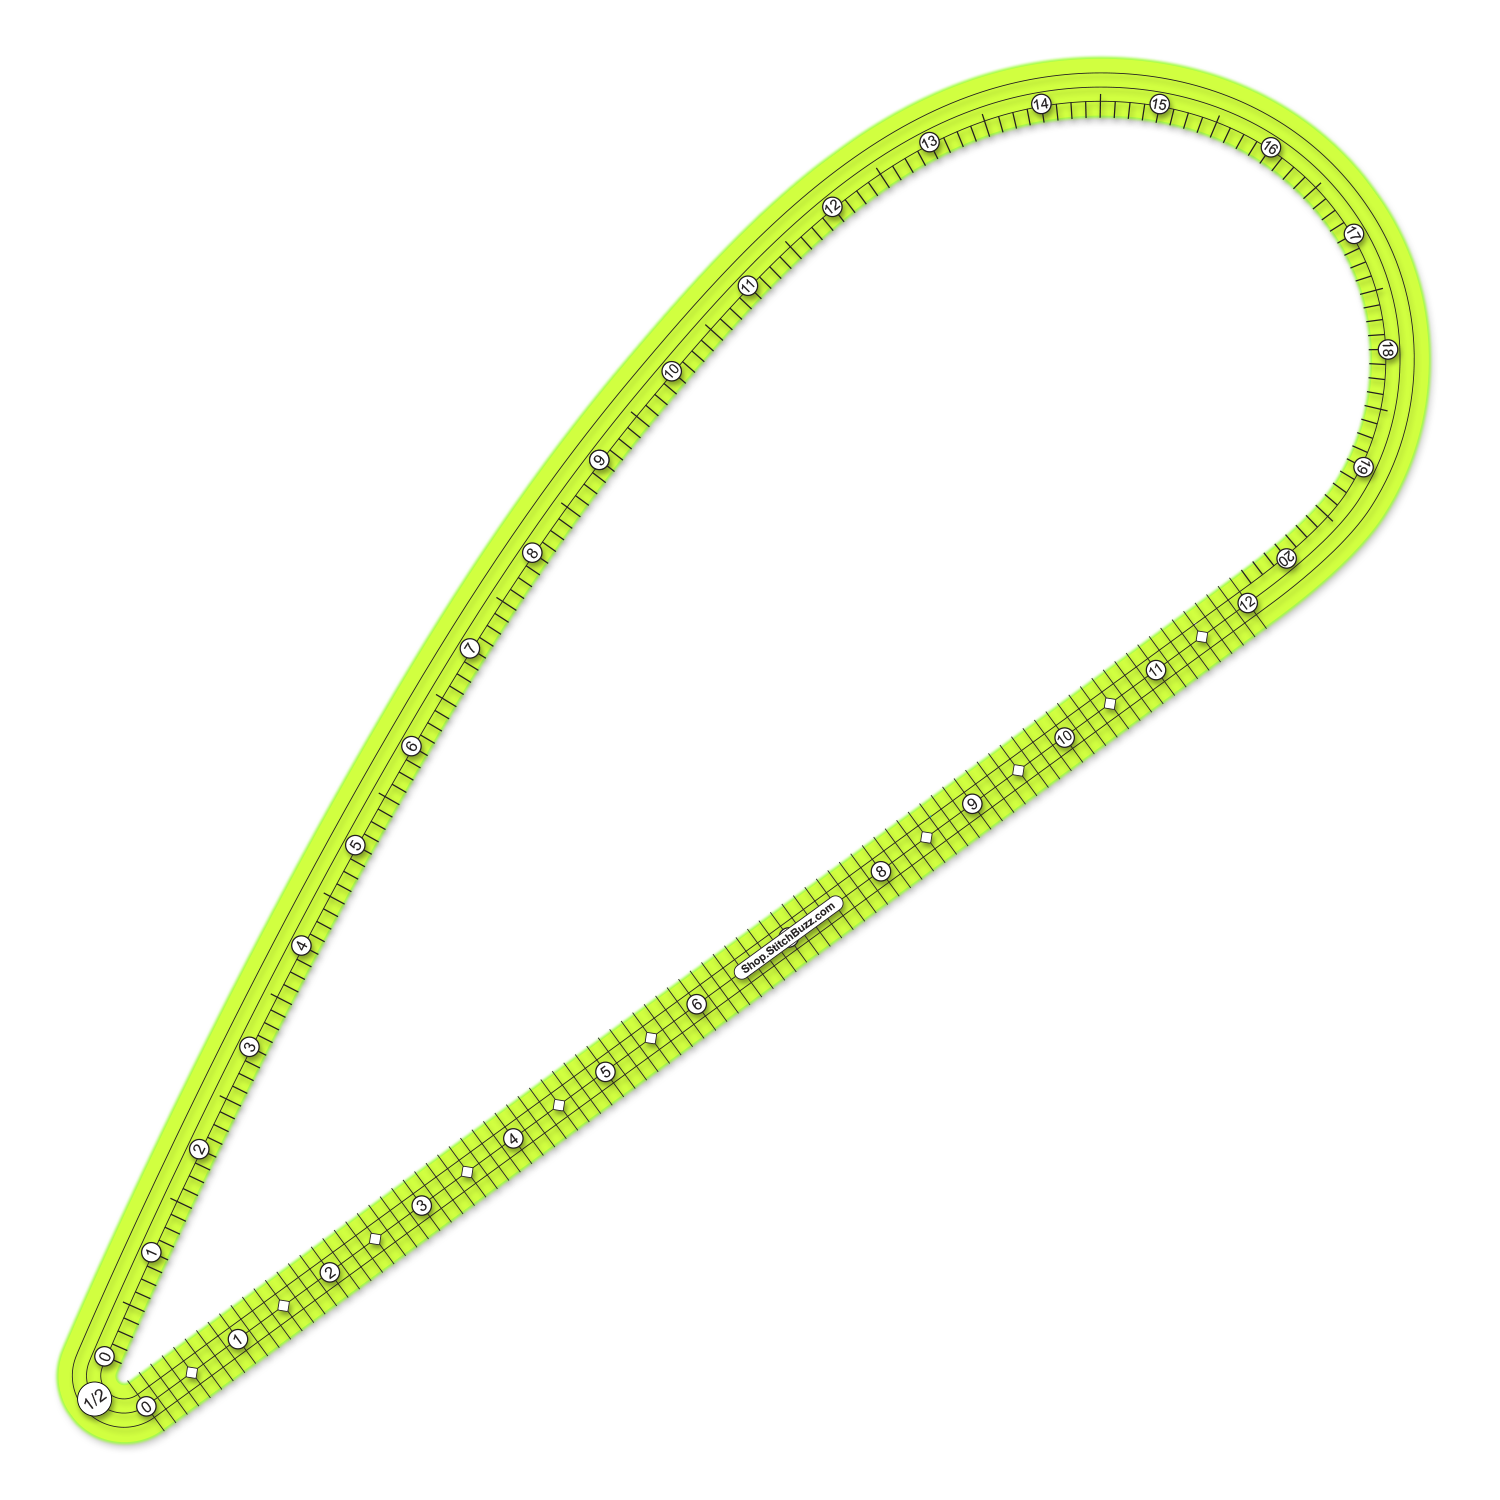 half inch seam allowance large transparent green french curve ruler